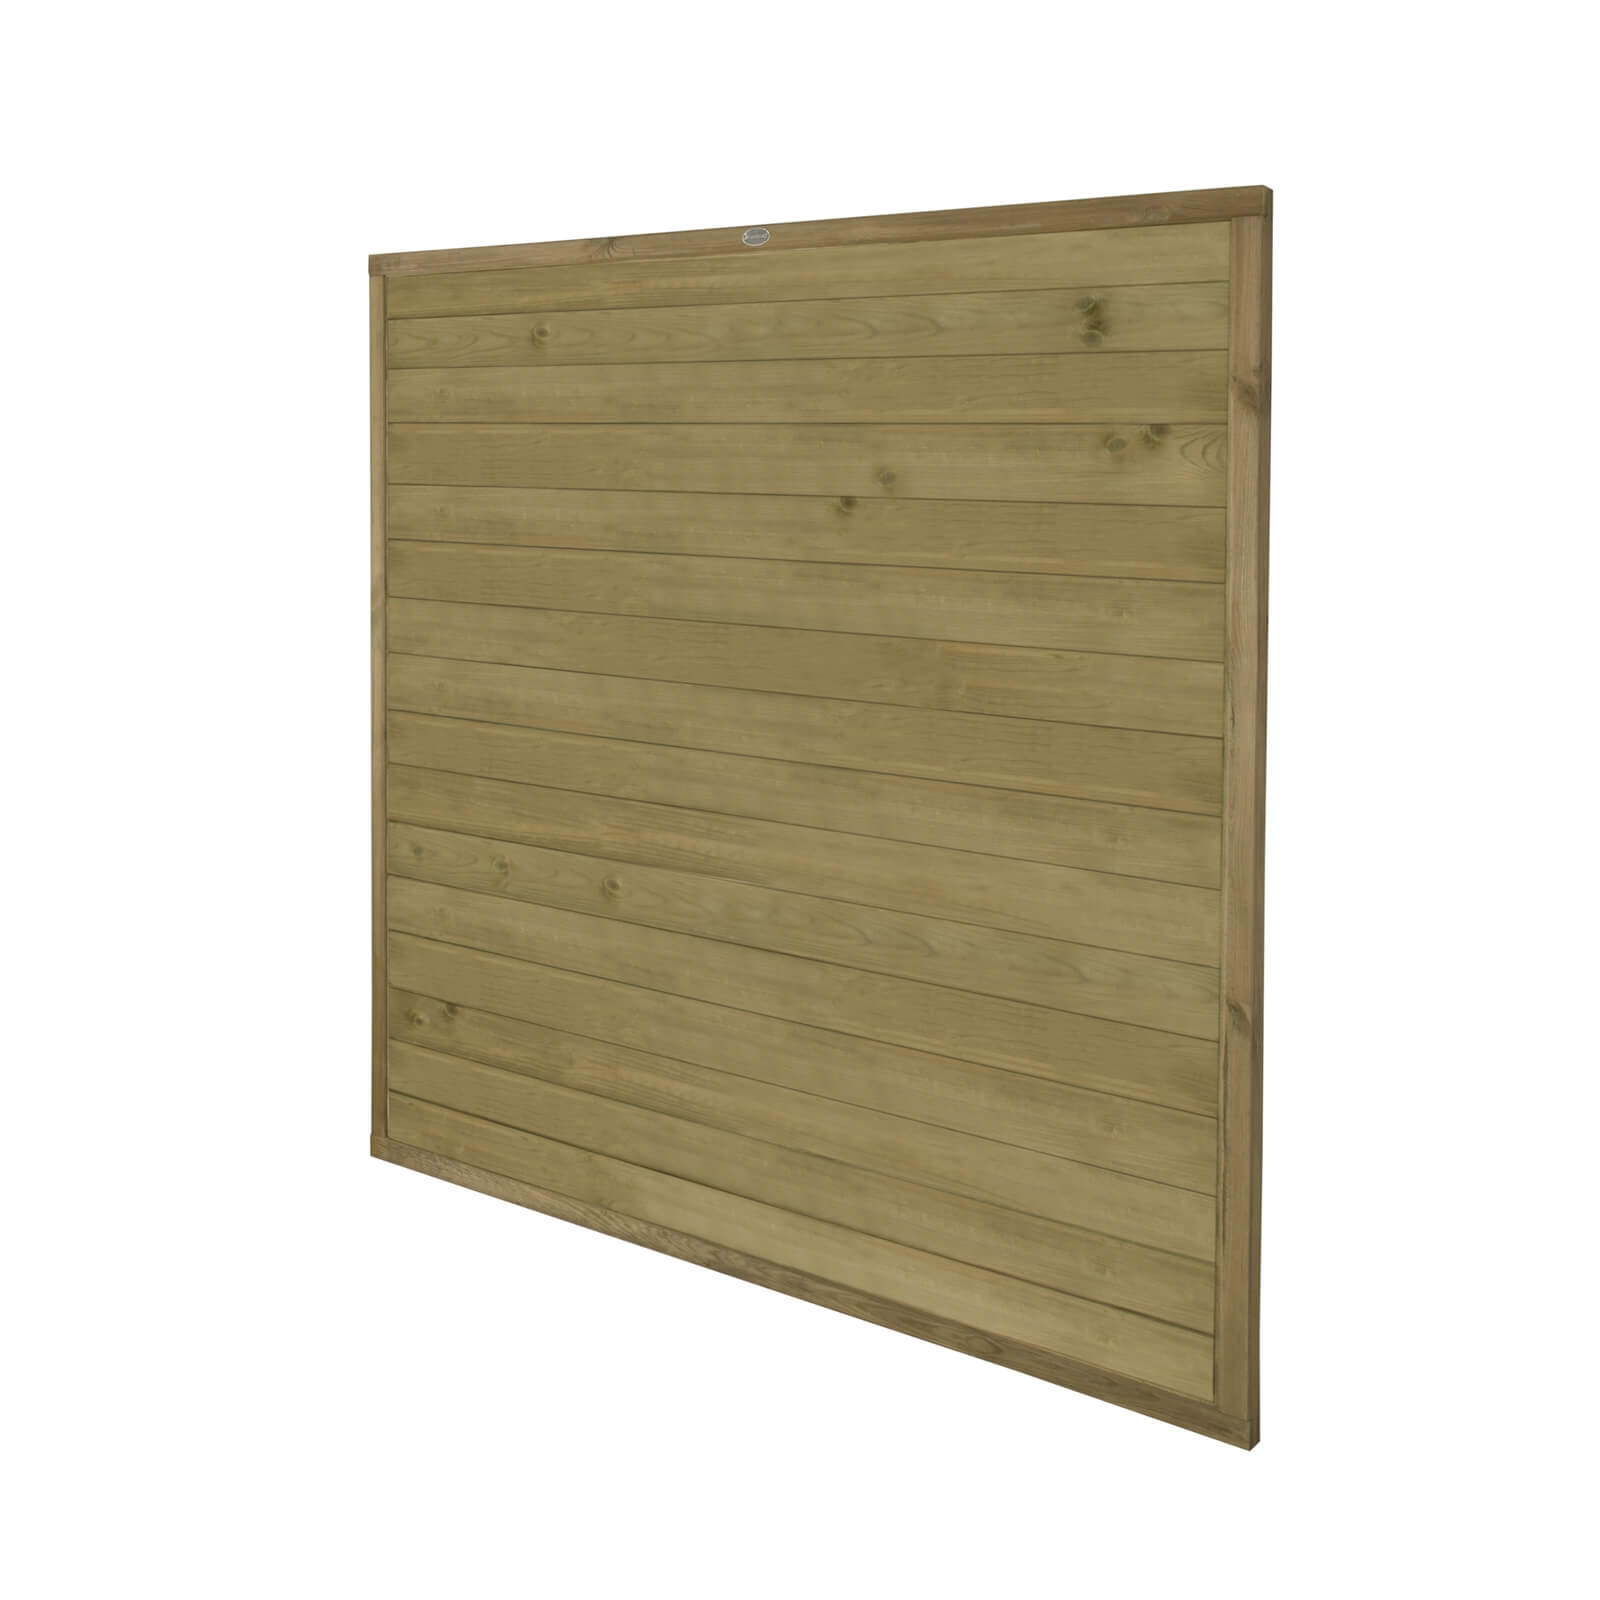 Horizontal Tongue & Groove Fence Panel - 6ft - Pack of 4